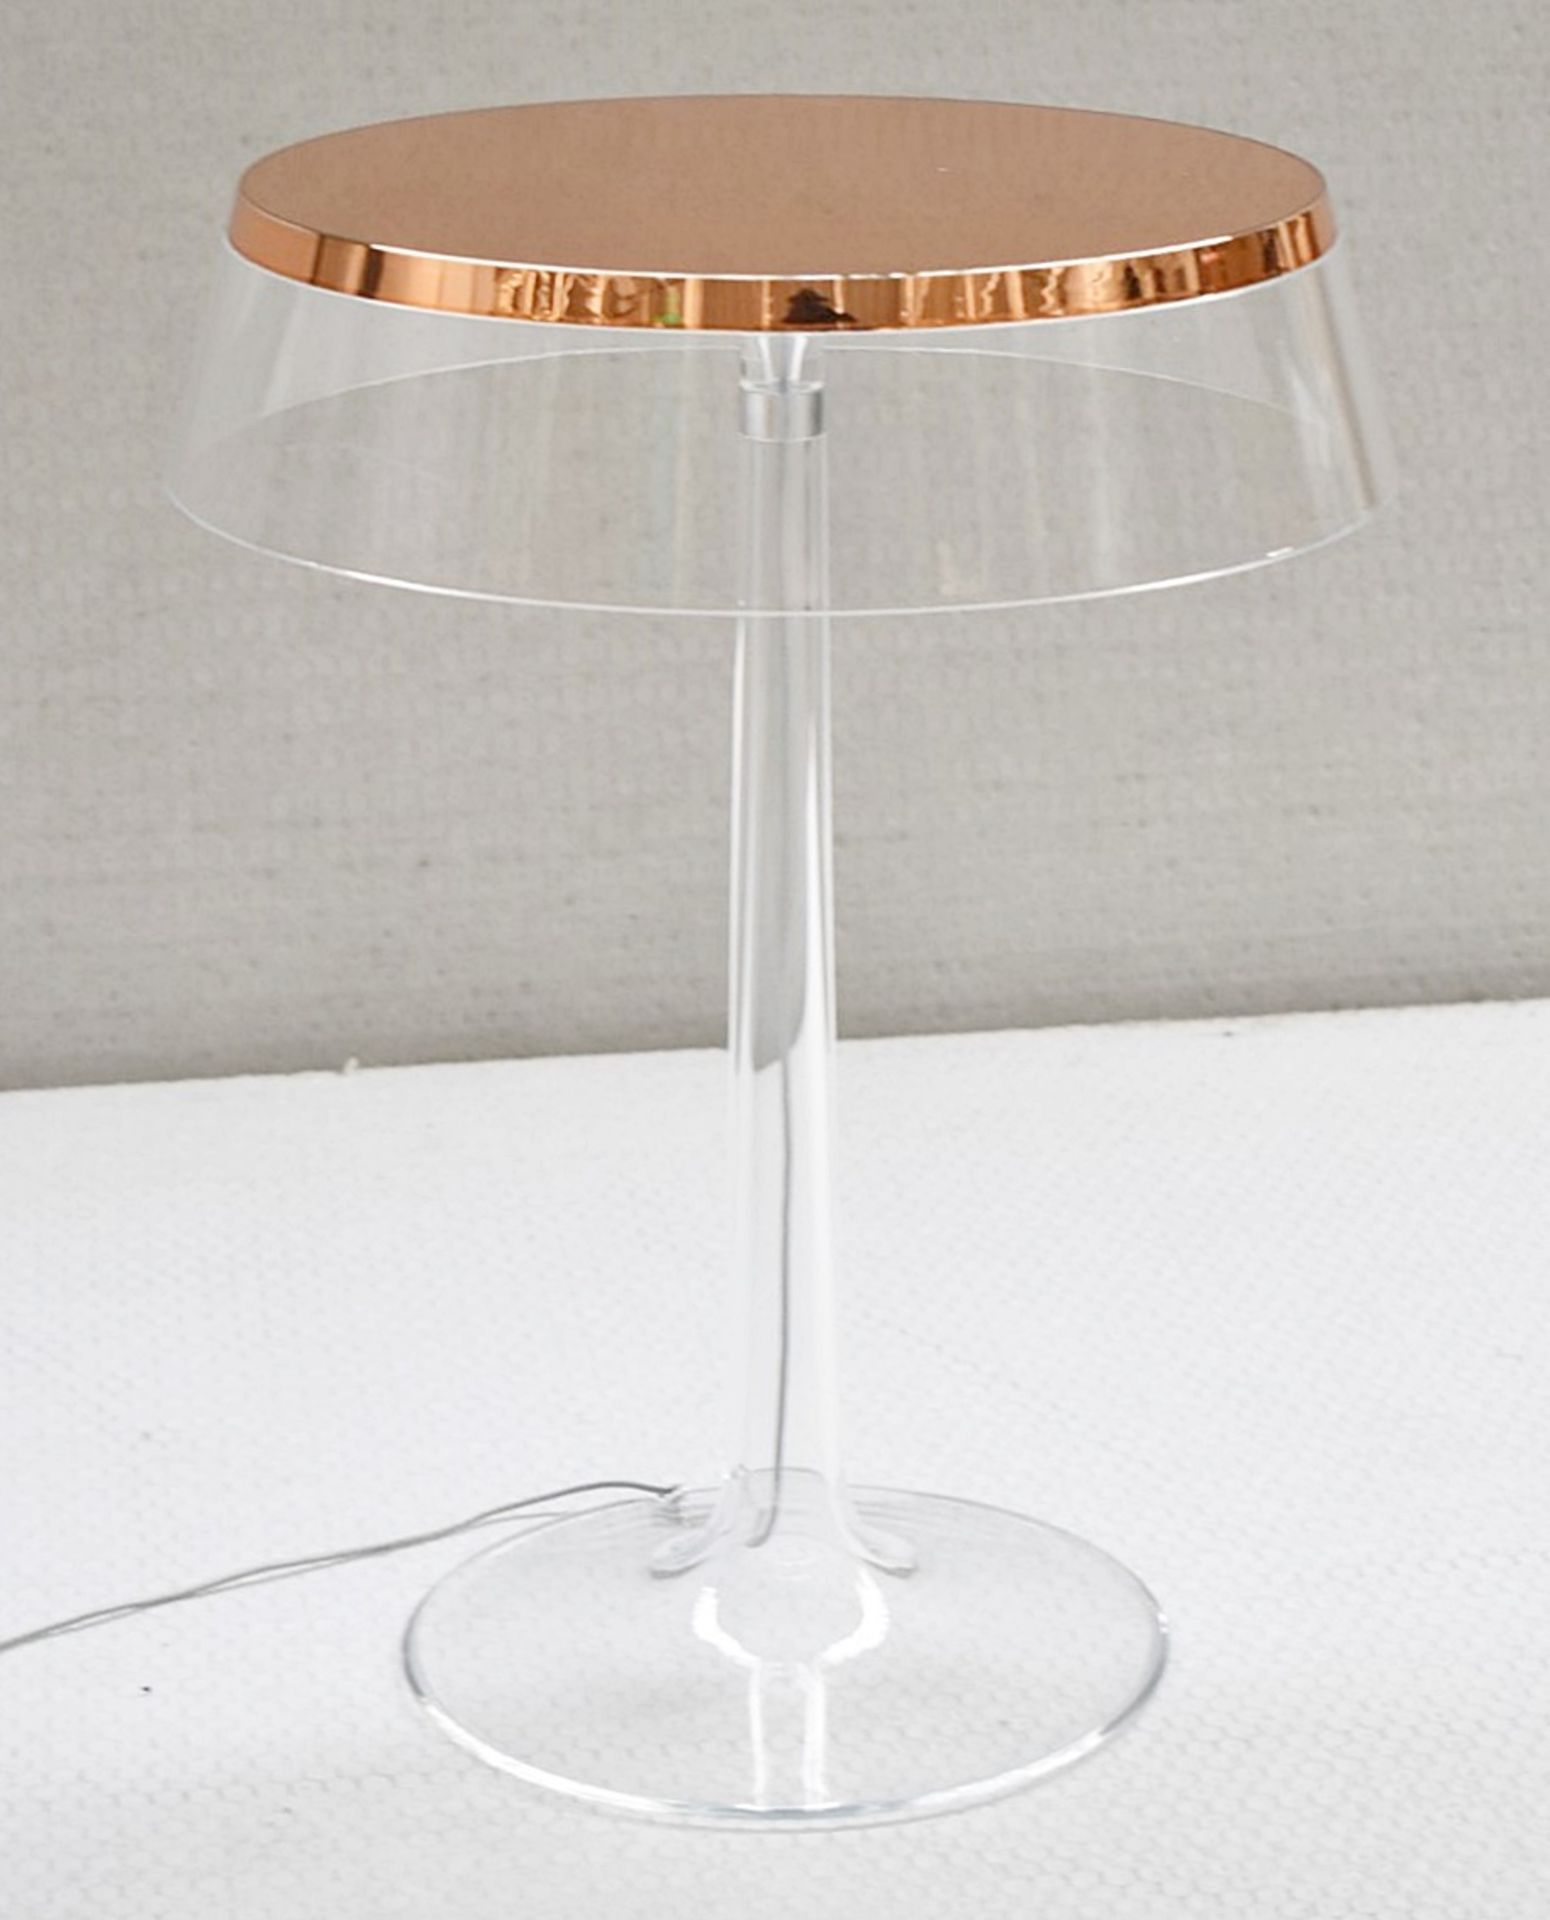 1 x FLOS / PHILIPPE STARCK 'Bon Jour' Clear Table Lamp With A Copper Top - Original RRP £540.00 - Image 2 of 3